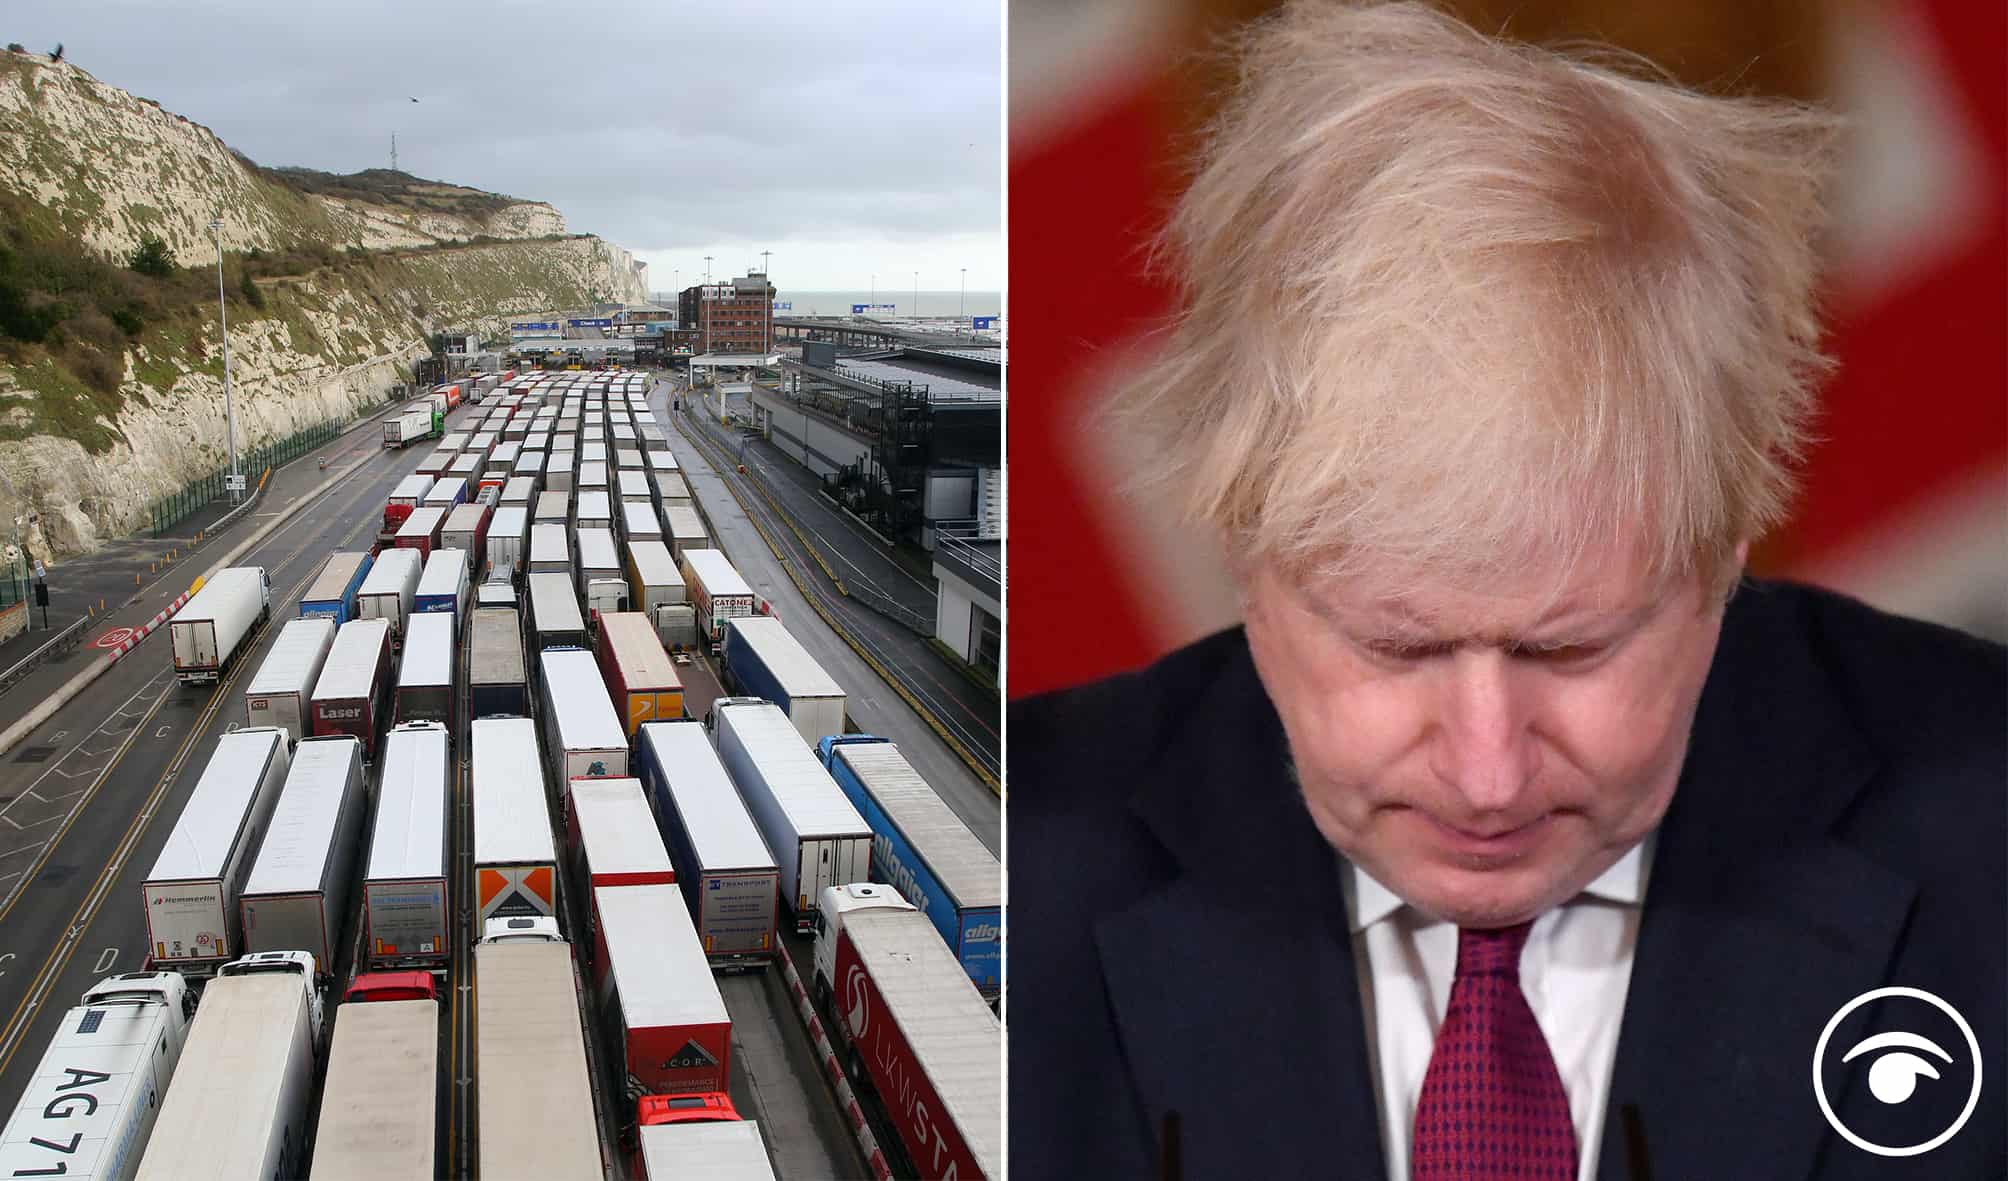 ‘Boris Johnson is a c***’ – Alastair Campbell condemns PM in the most explicit way